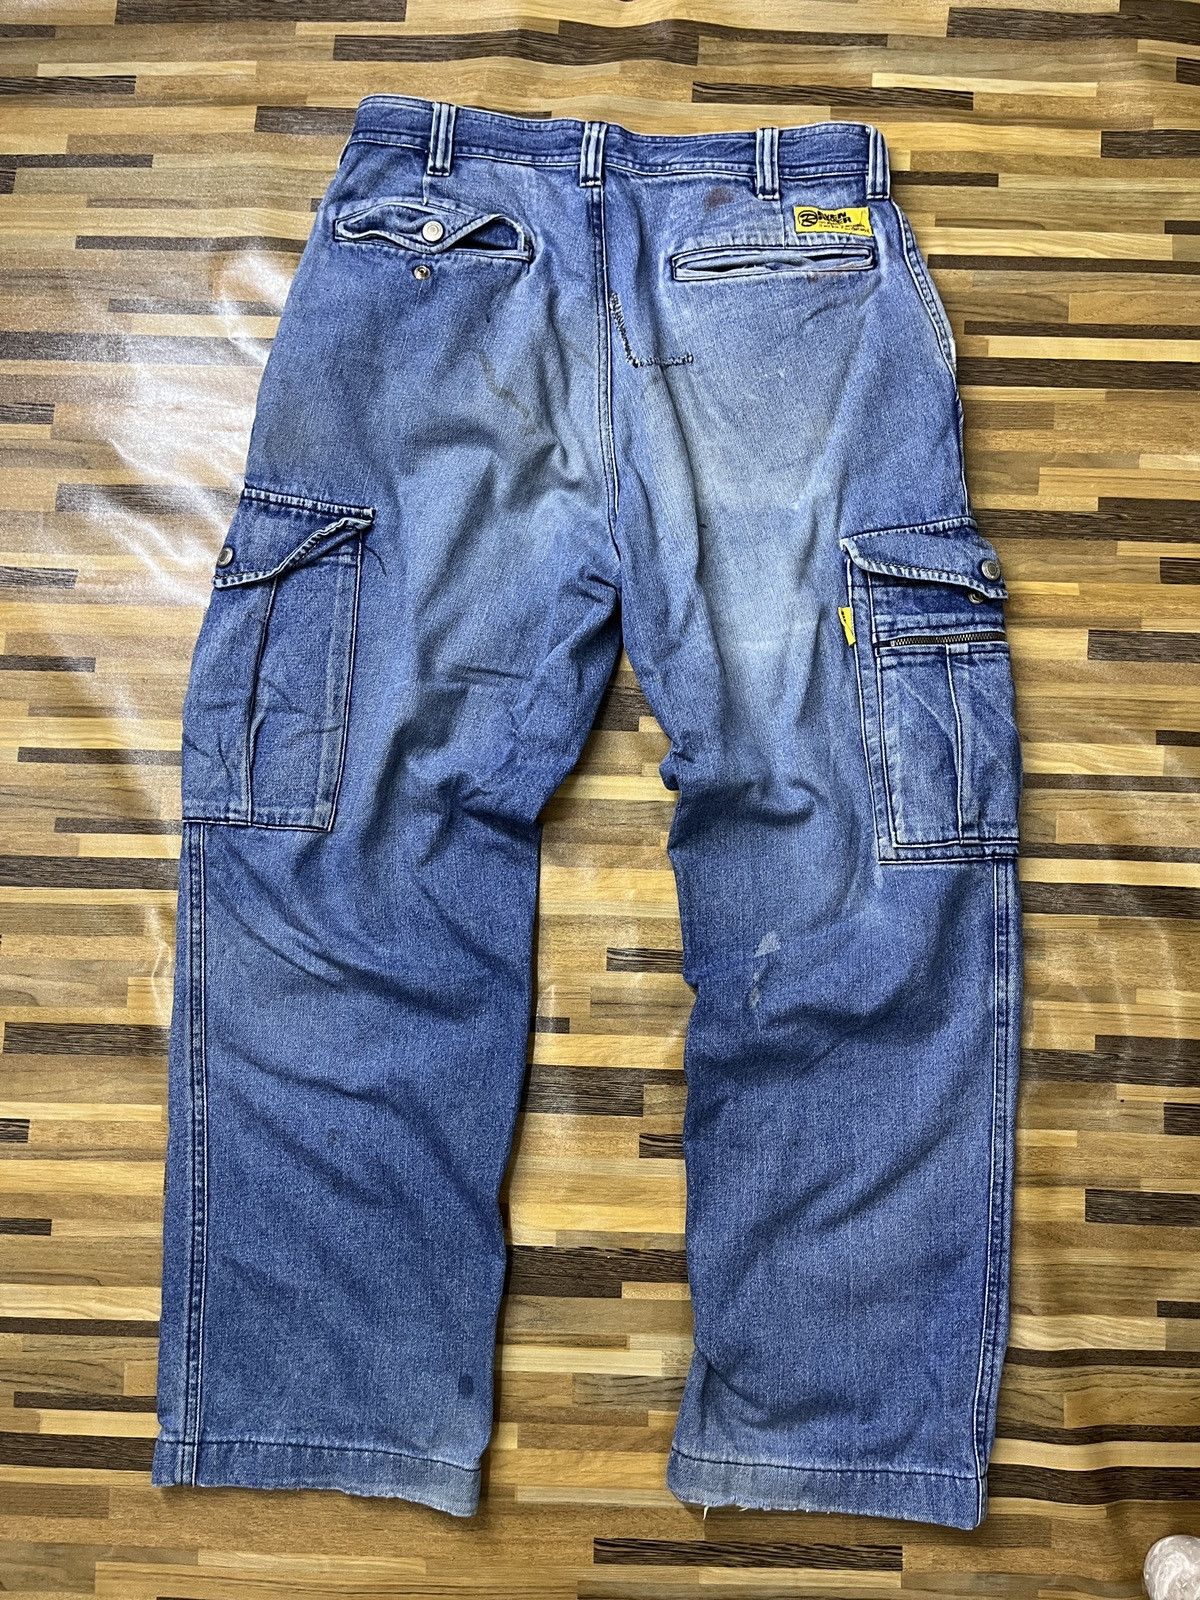 Distressed Denim - Worn Even River Japanese Cargo Denim Ripped Baggy Style - 18